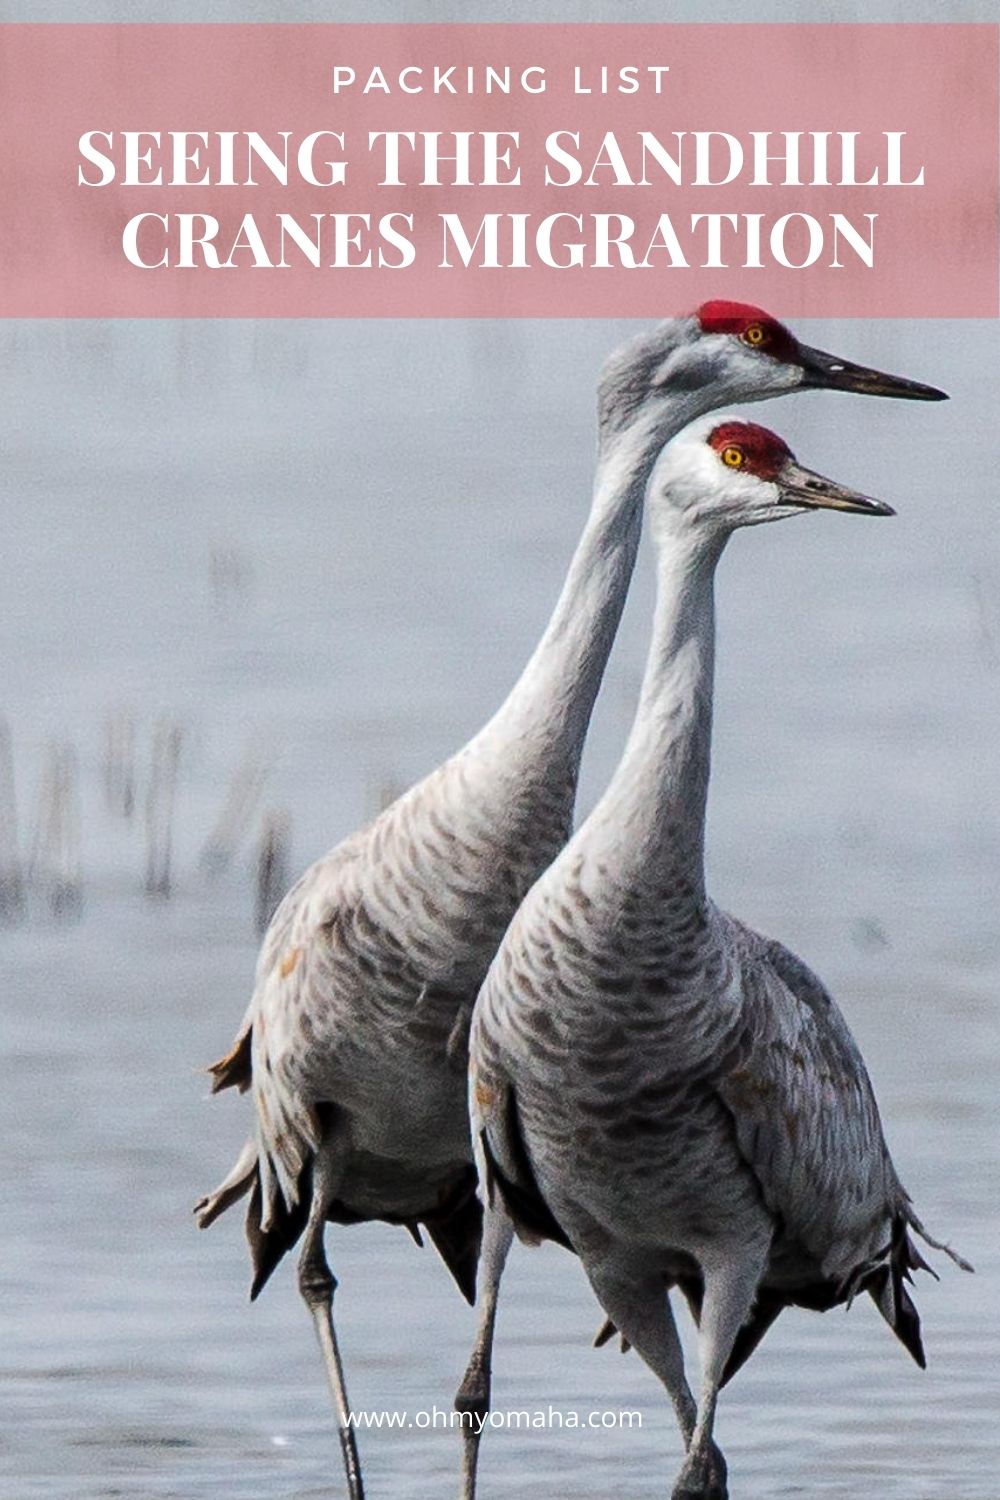 Planning your first trip to see the Sandhill Crane Migration? Here's a packing list of what to bring: How to stay warm and how to take great pictures!